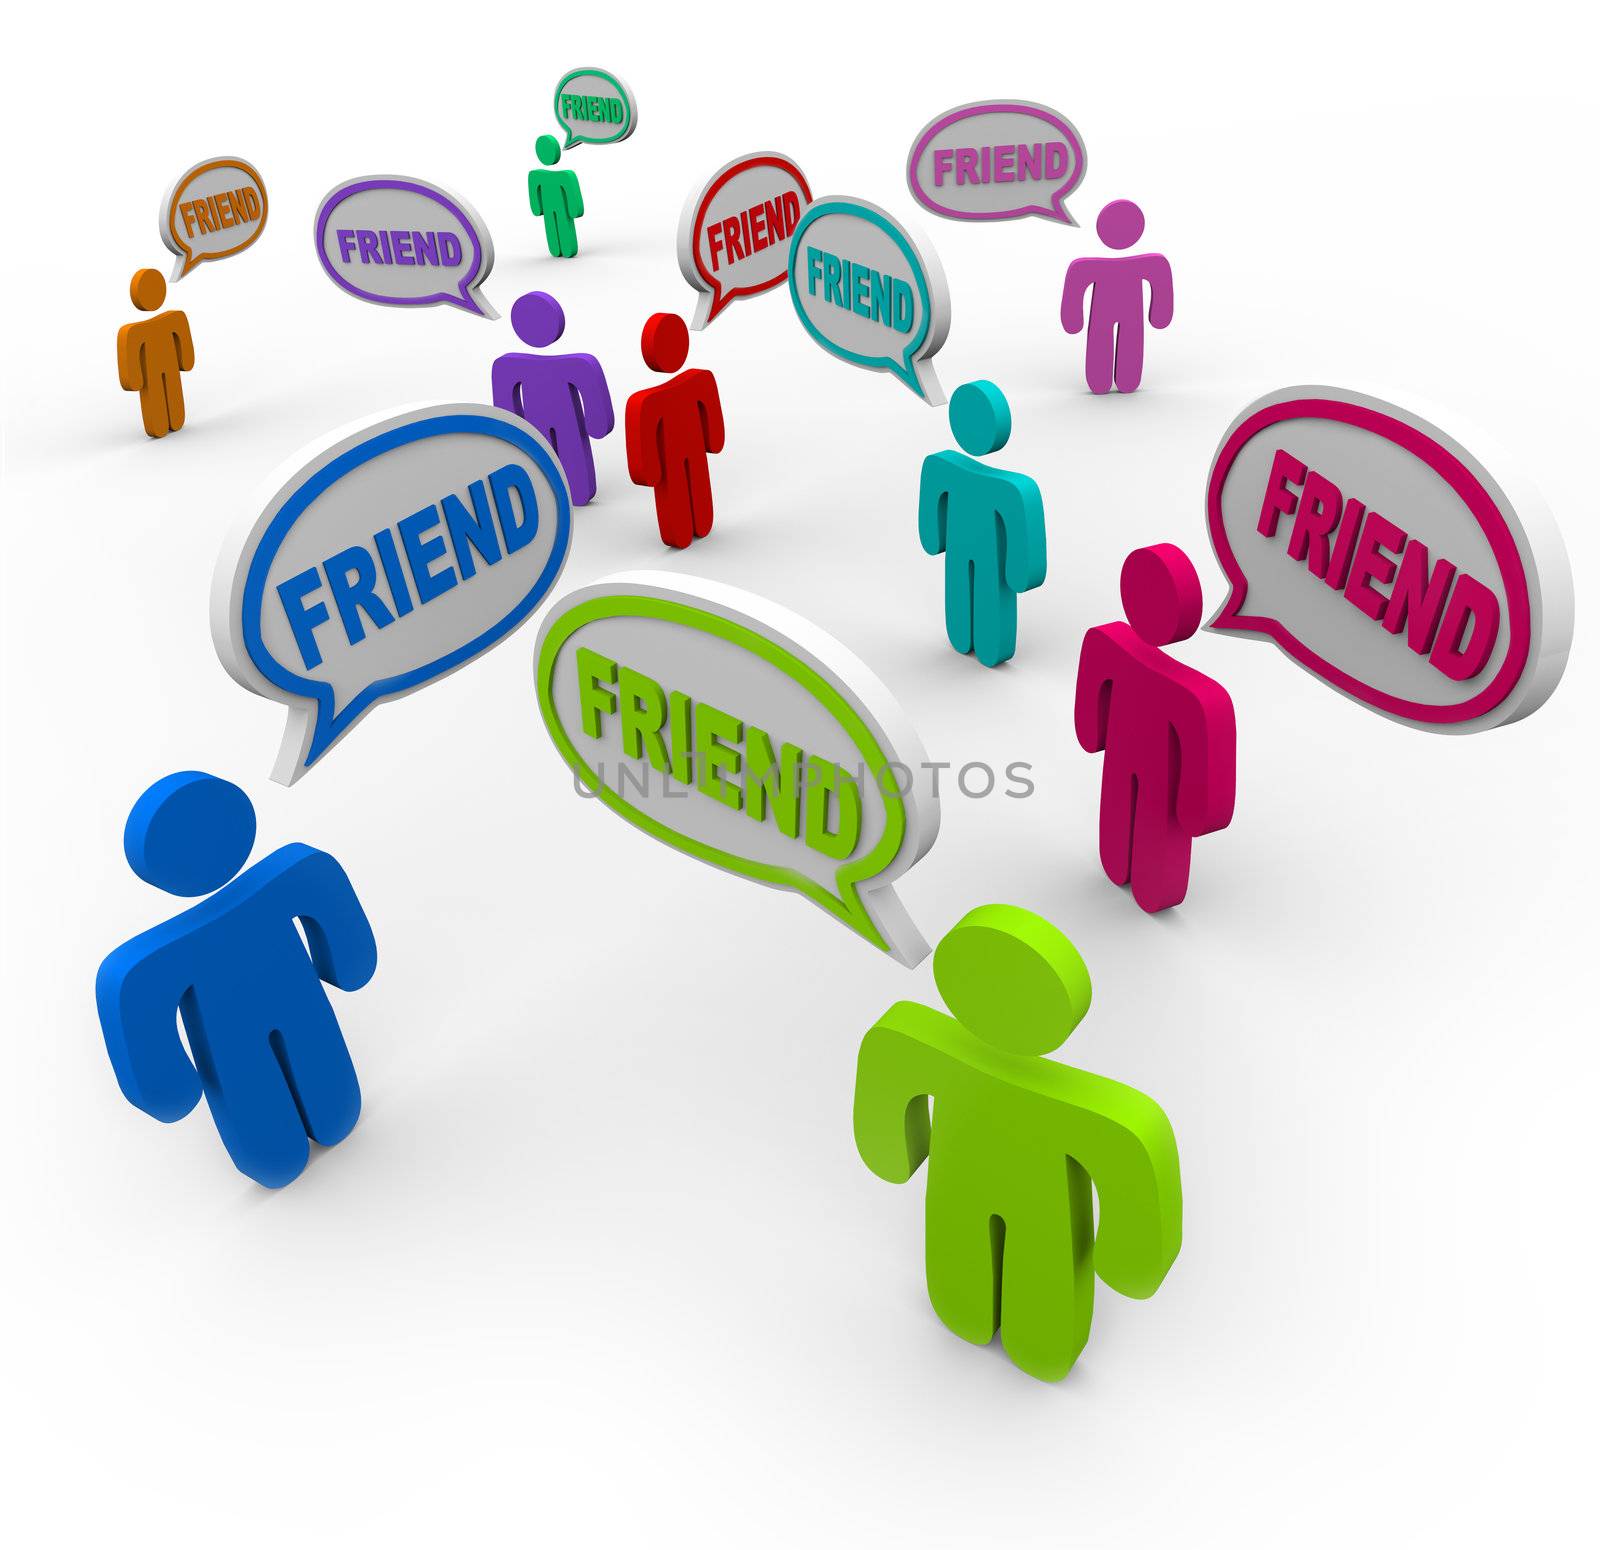 Many people speaking and greeting each other with speech bubbles and the word Friend to symbolize friendship